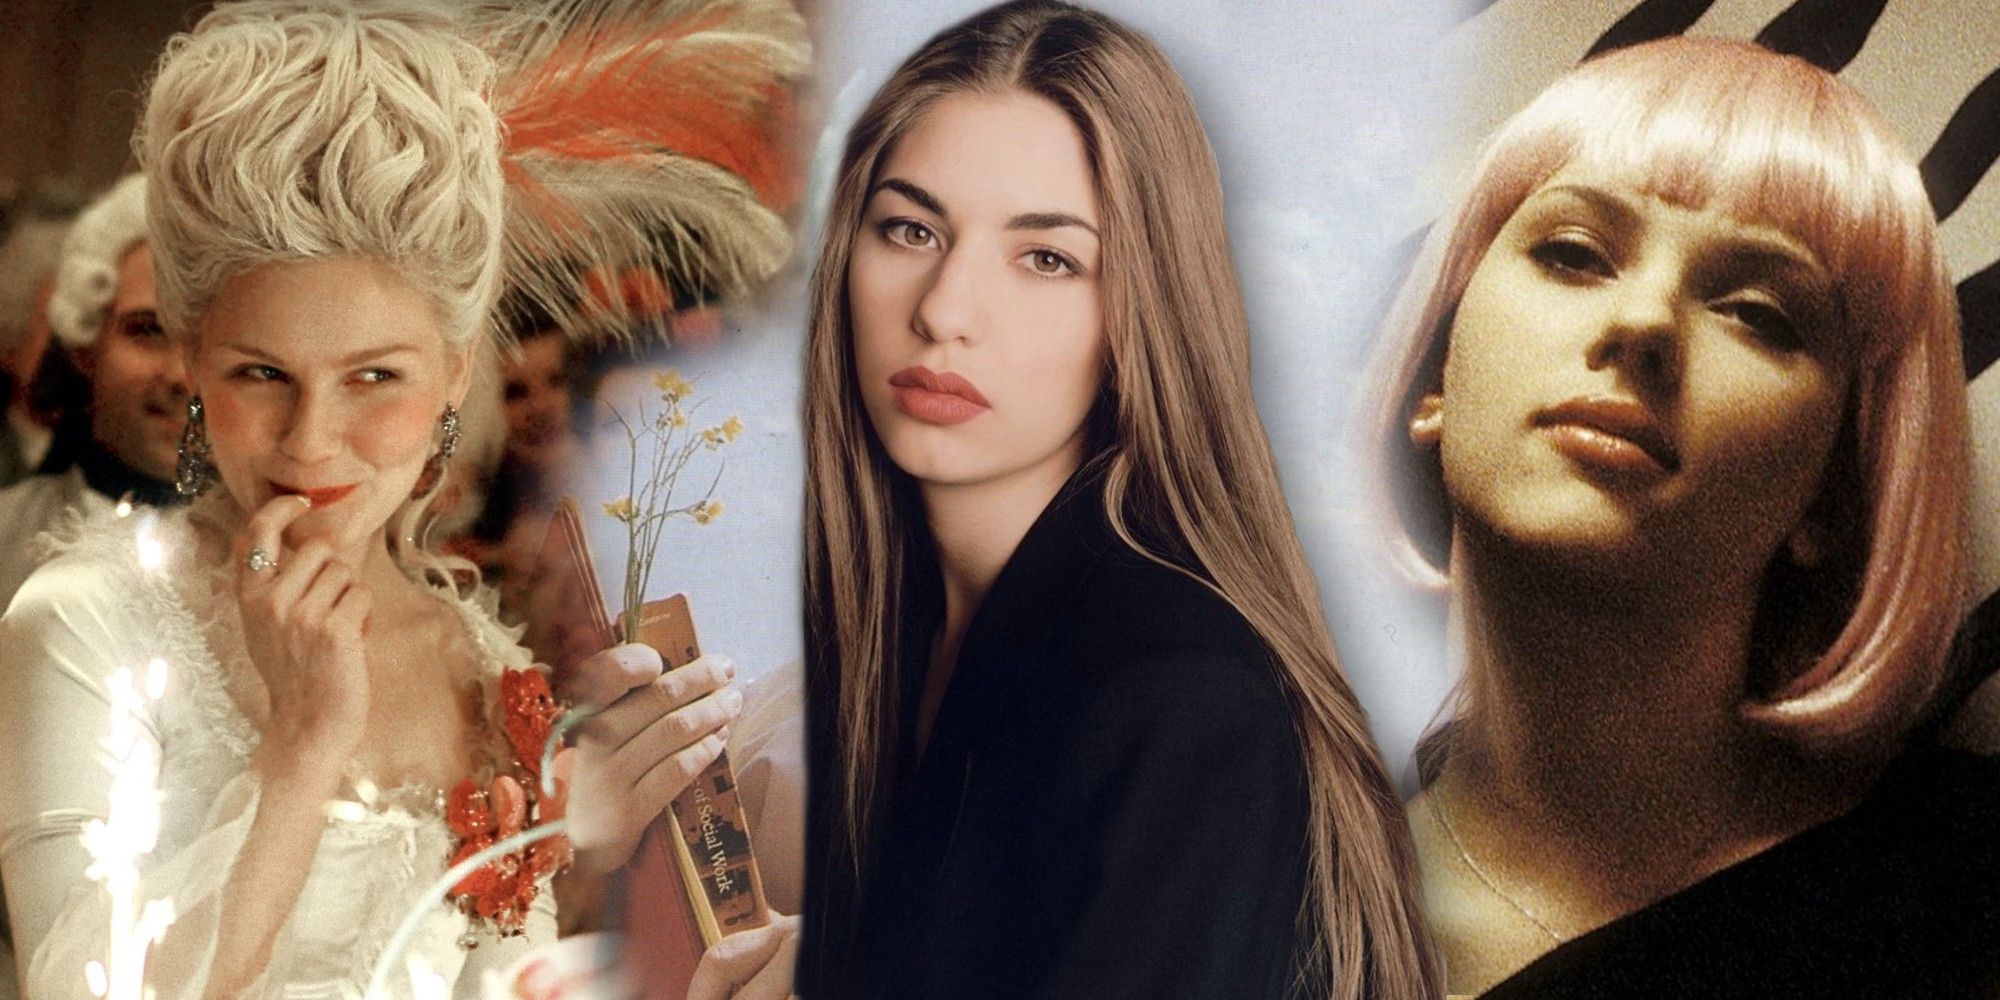 7 of the most stylish moments in Sofia Coppola's films – as the